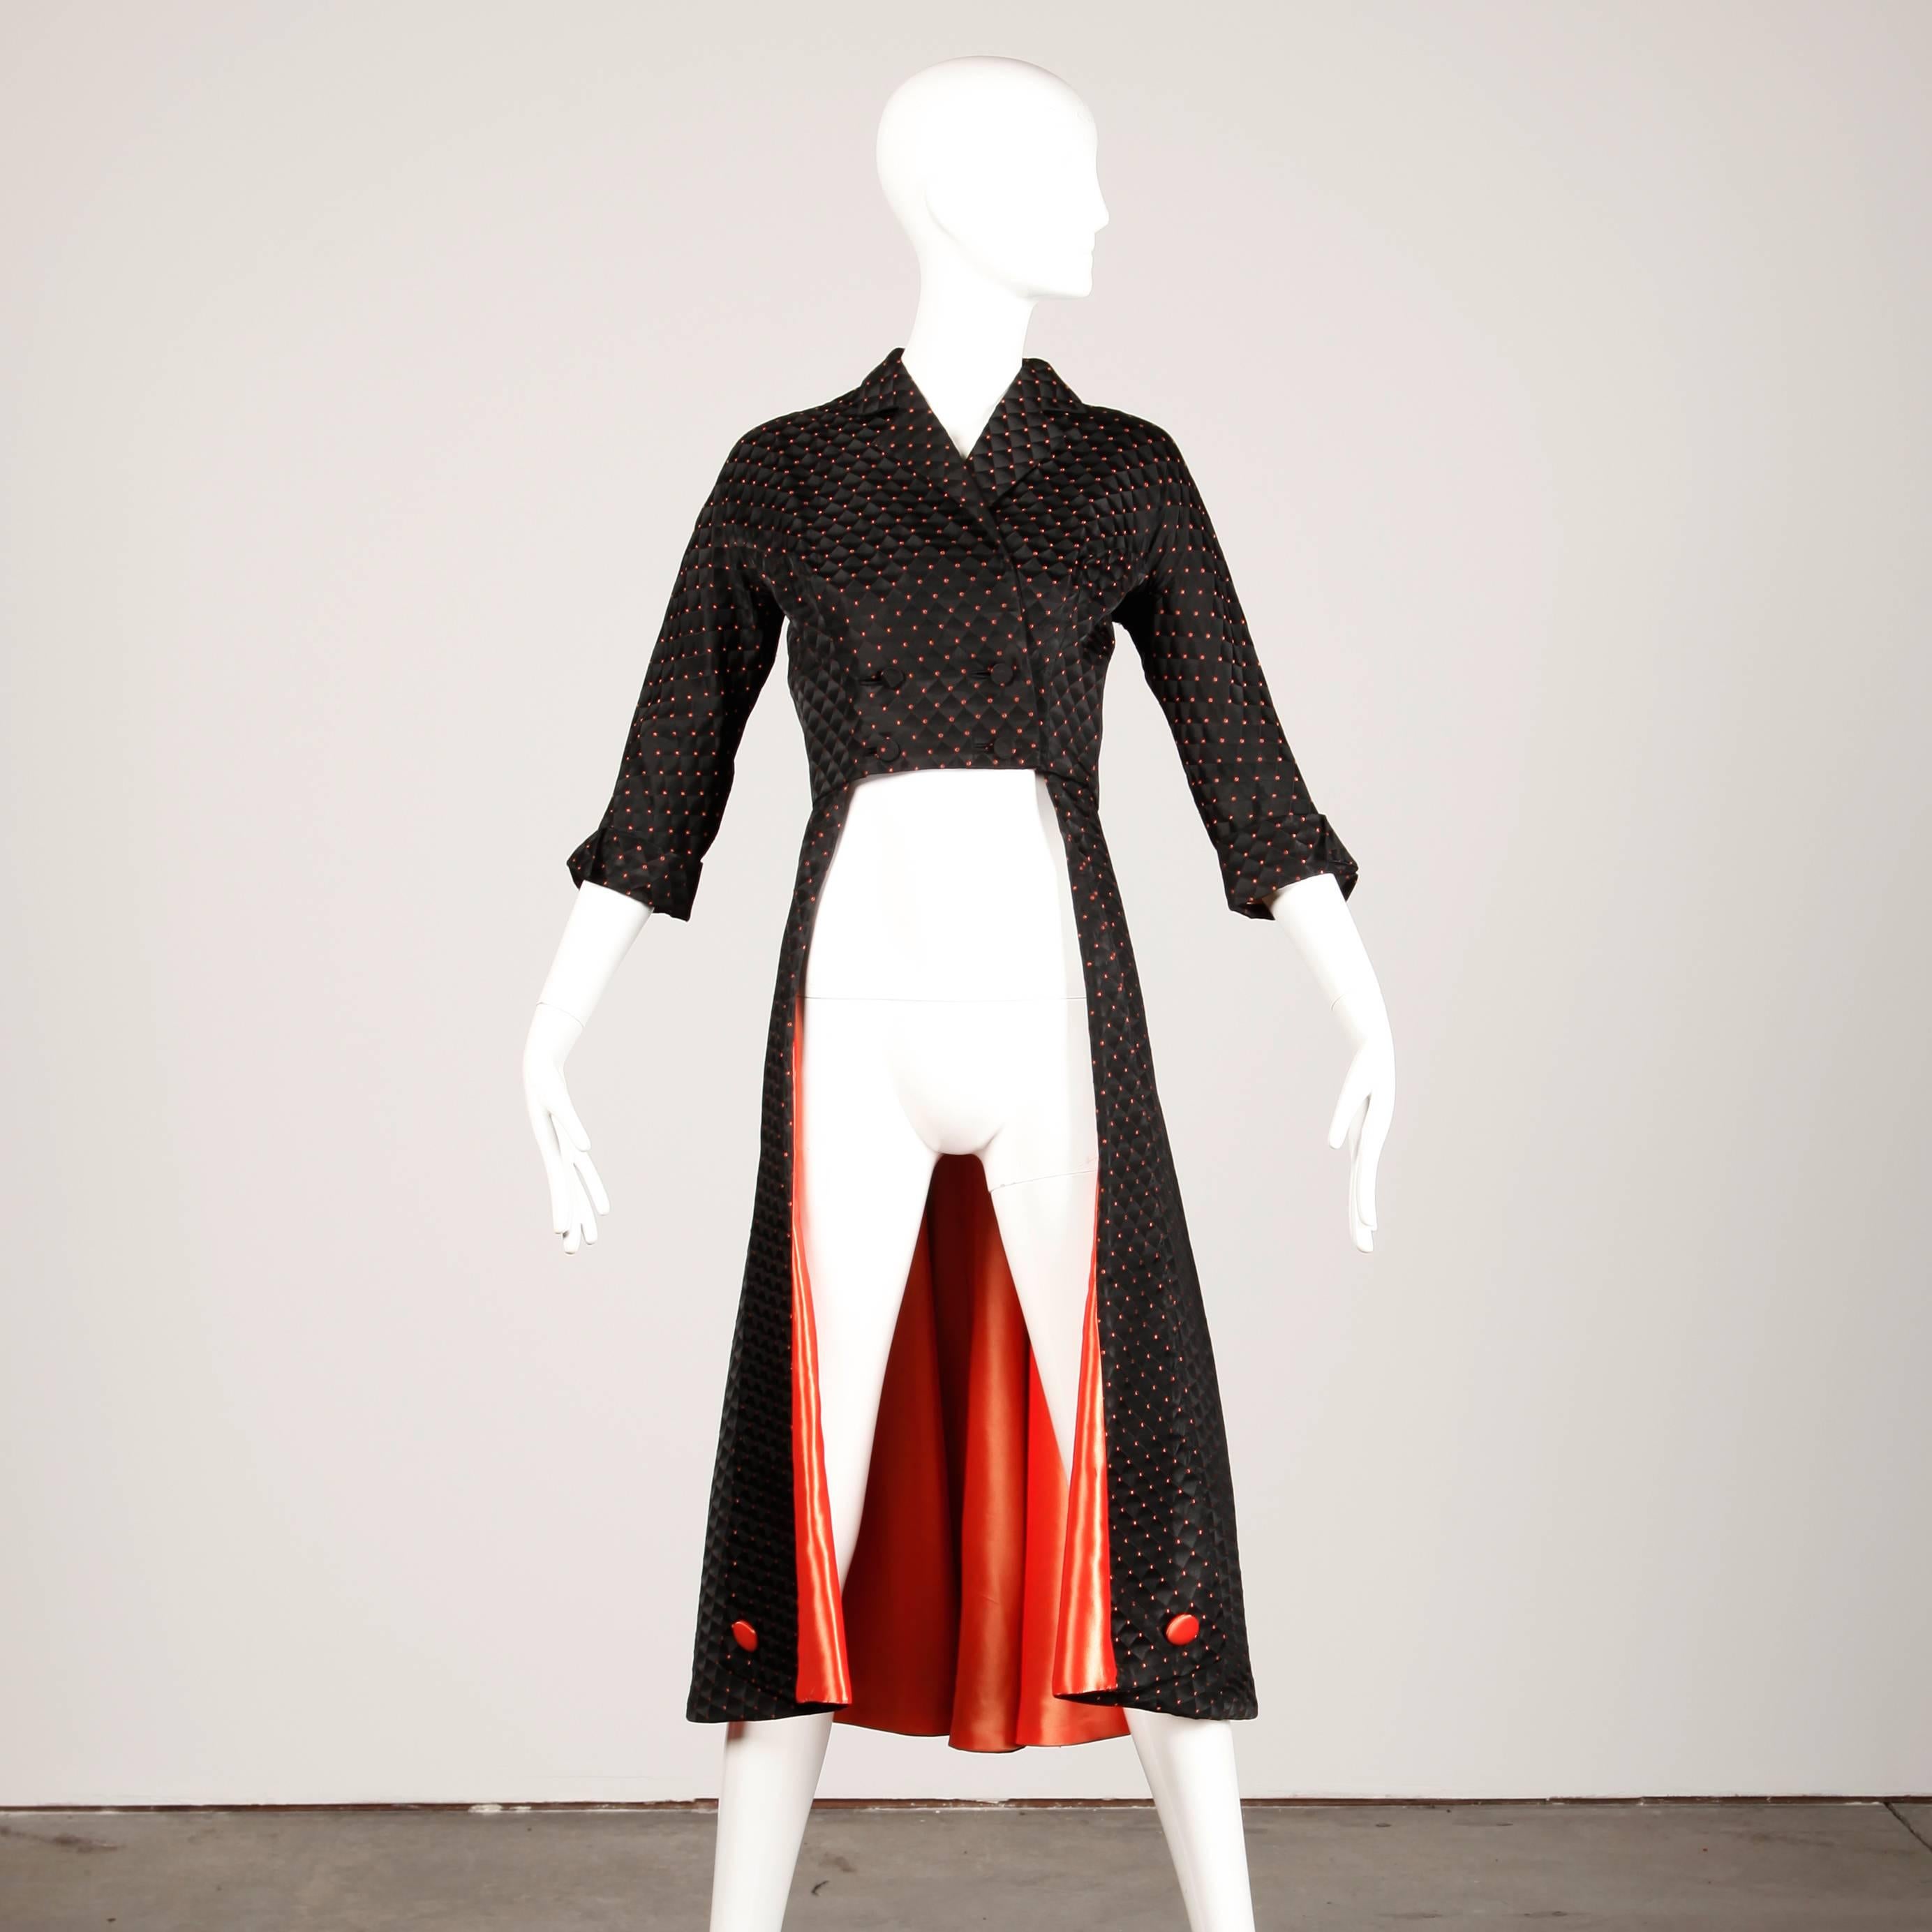 Incredible vintage 1950s black and coral satin coat that is meant to be worn over a dress or skirt. Full sweep long back and cut out open front. Fully lined with front button and snap closure. Fits like a modern size small. The bust measures 36